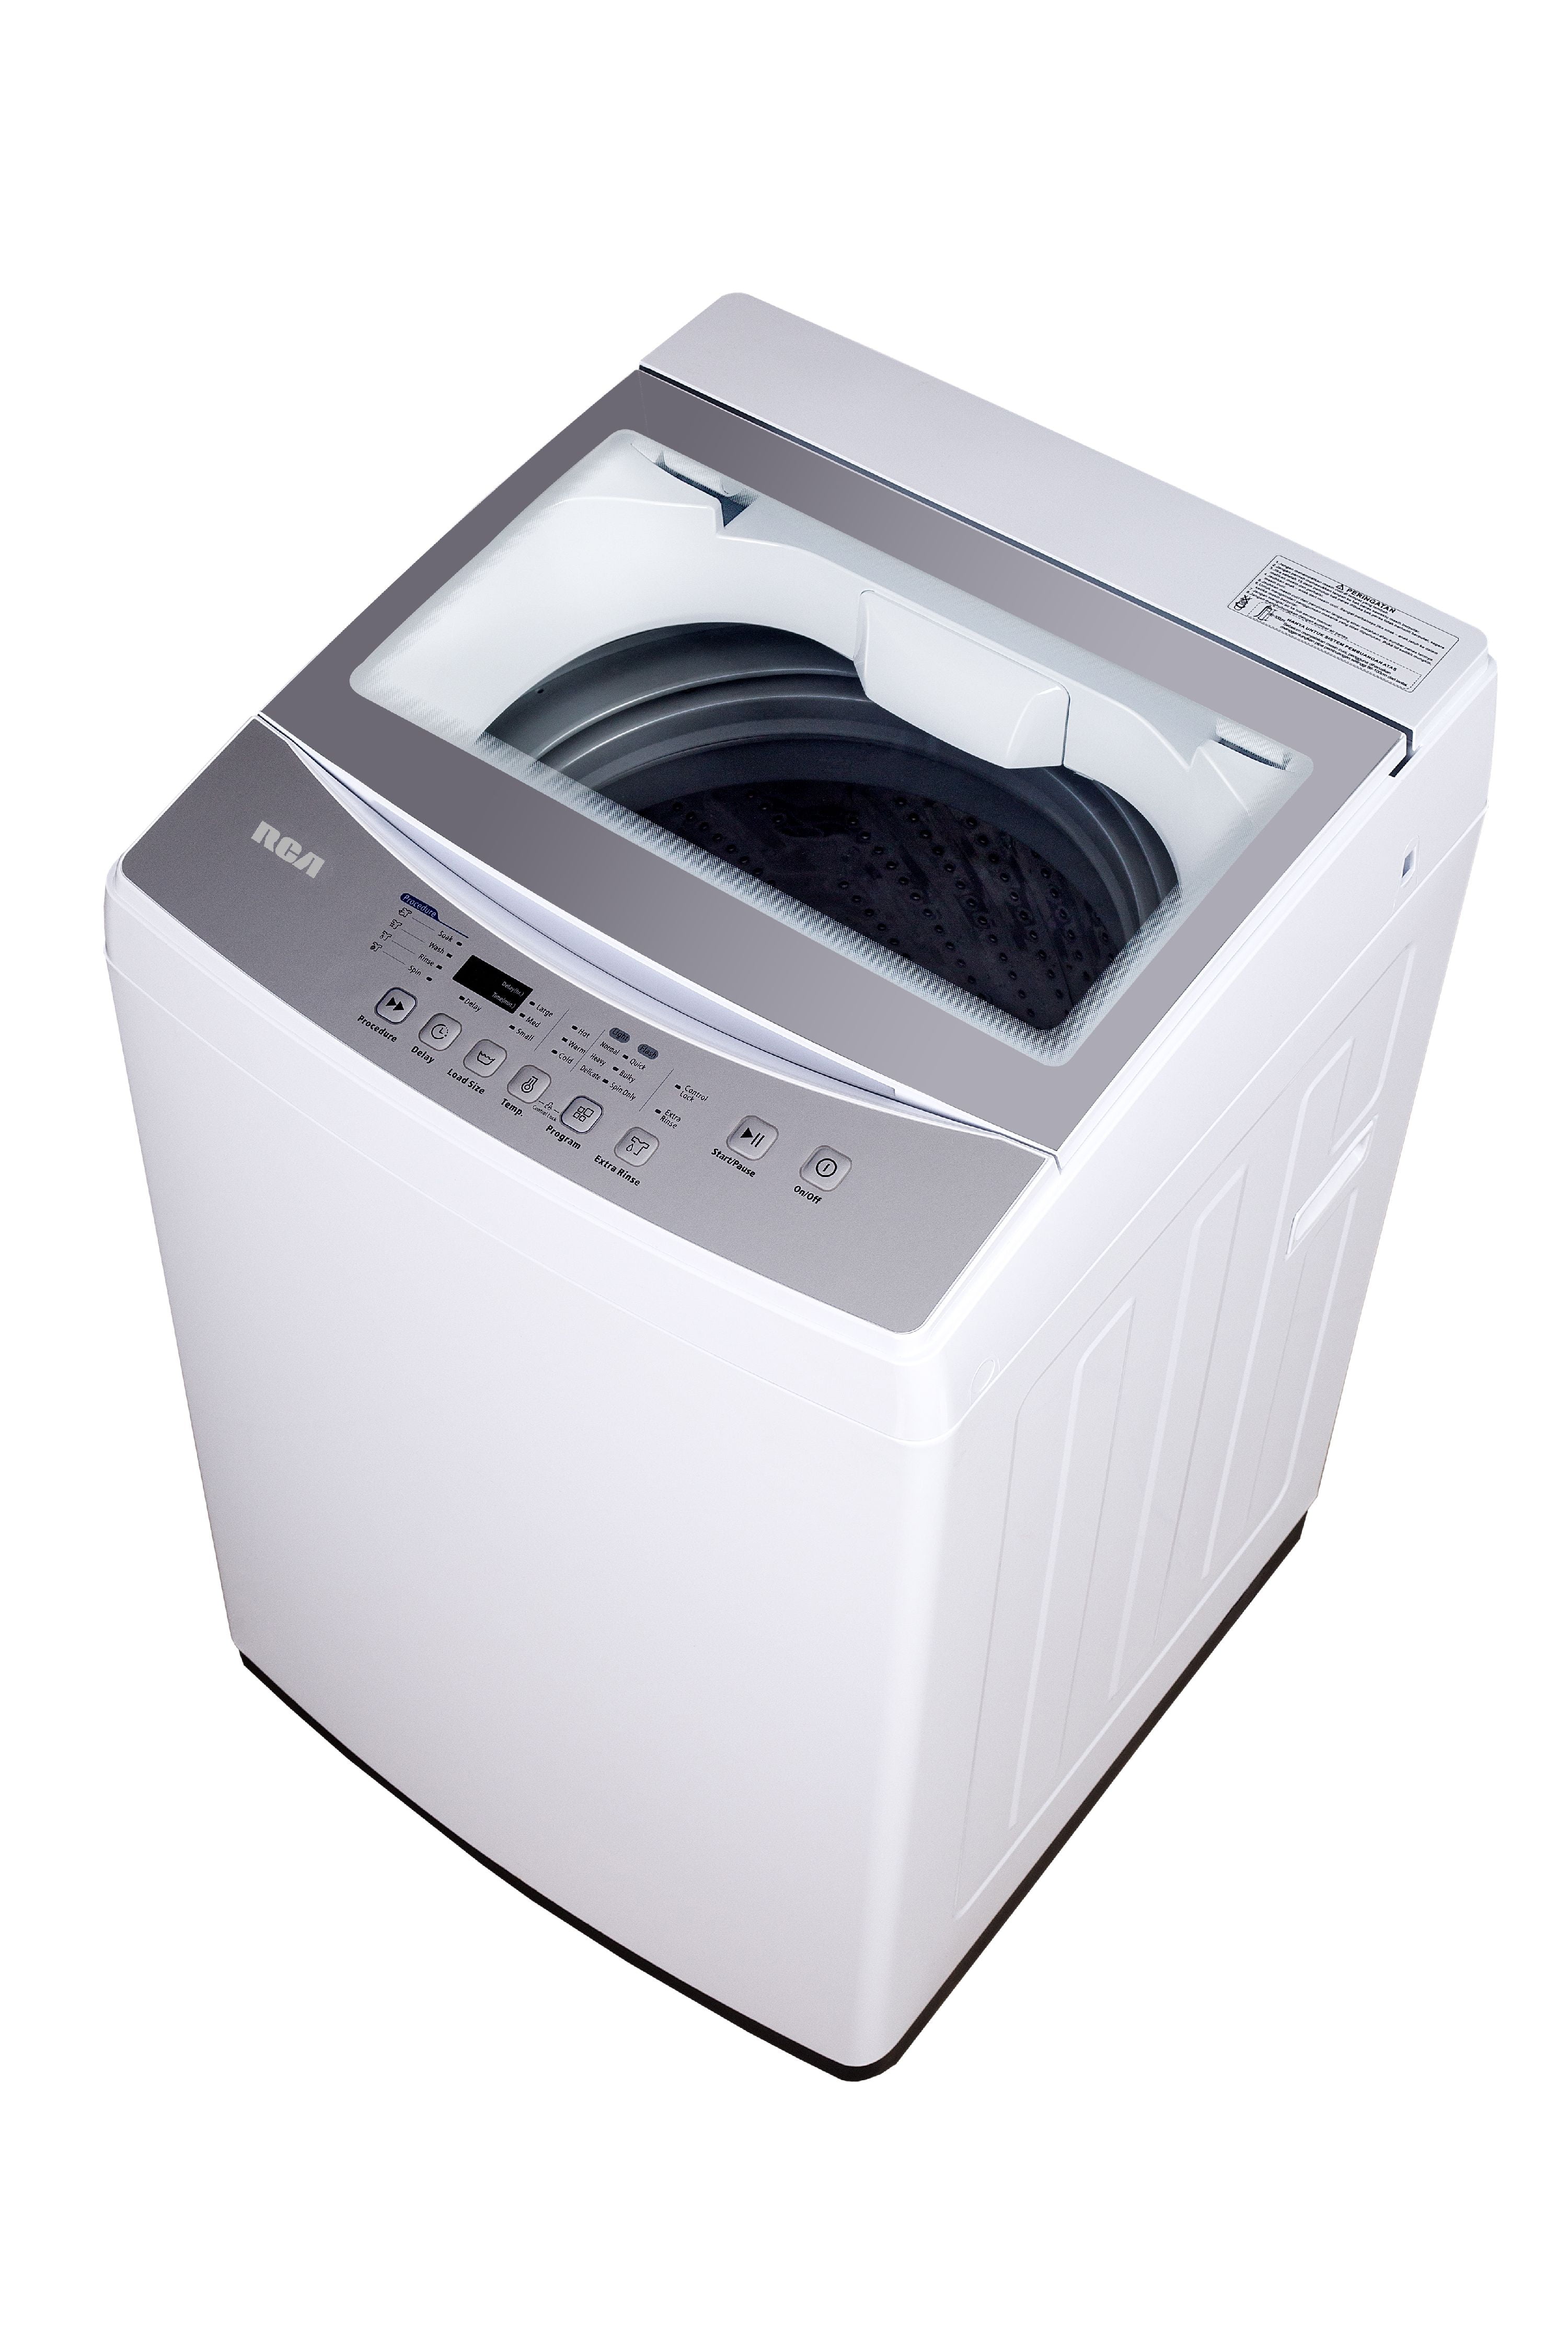  BLACK+DECKER Small Portable Washer, Washing Machine for  Household Use, Portable Washer 2.0 Cu. Ft. with 6 Cycles, Transparent Lid &  LED Display : Appliances